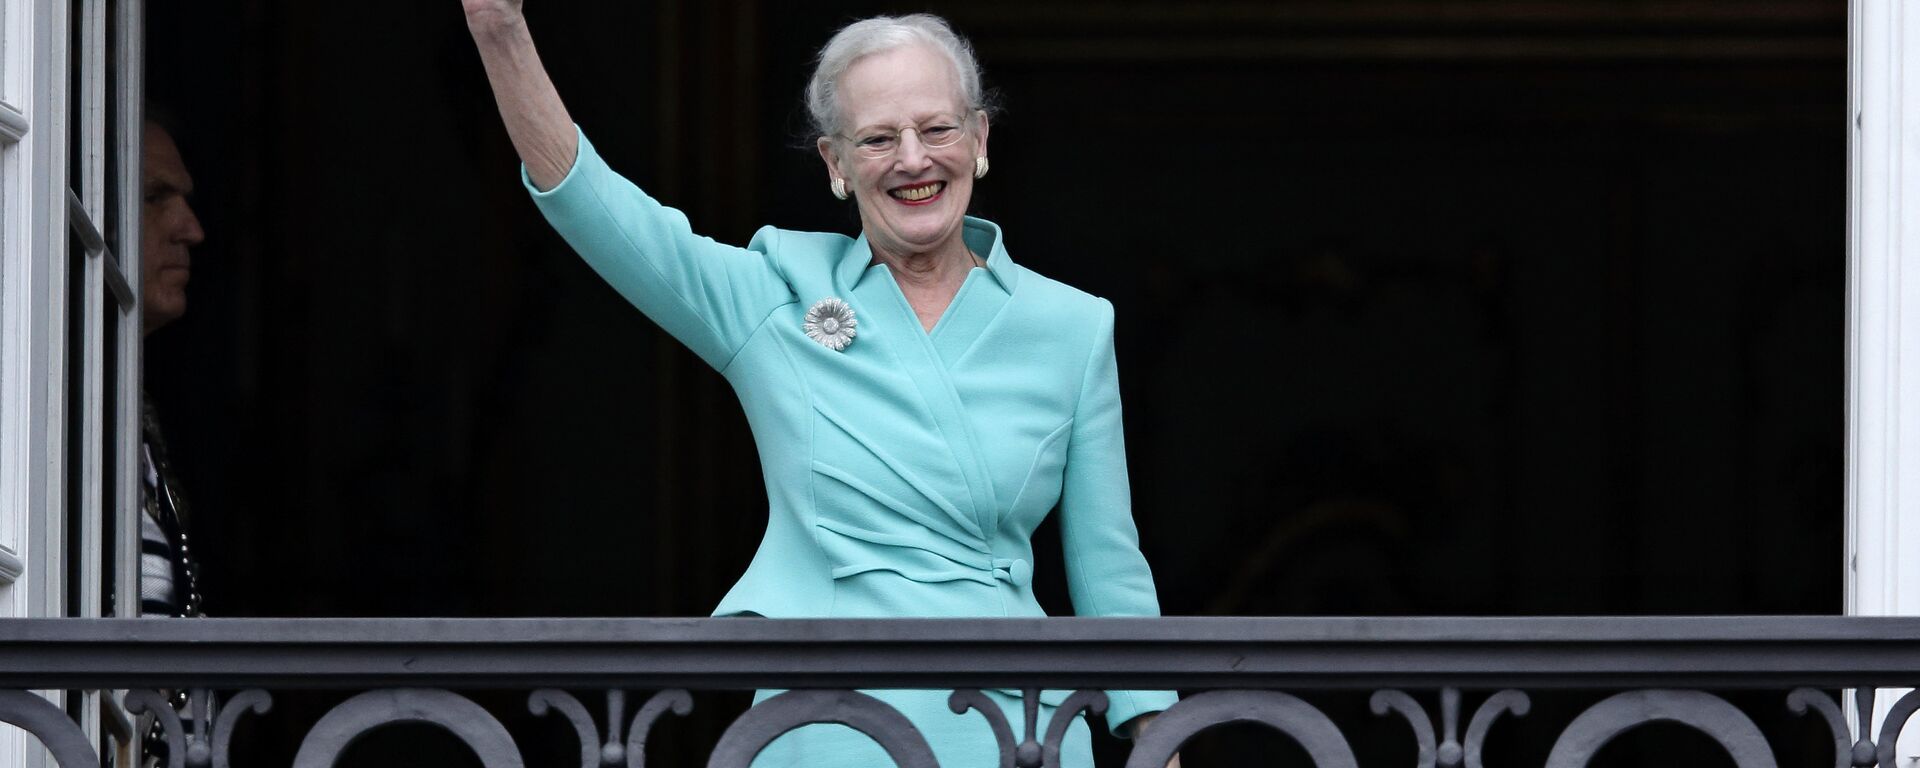 The Queen of Denmark, Margrethe II celebrates her 75th birthday on the balcony looking out at the crowd below, at Christian VII’s Palace, Amalienborg, Thursday, April 16 2015. - Sputnik International, 1920, 06.10.2022